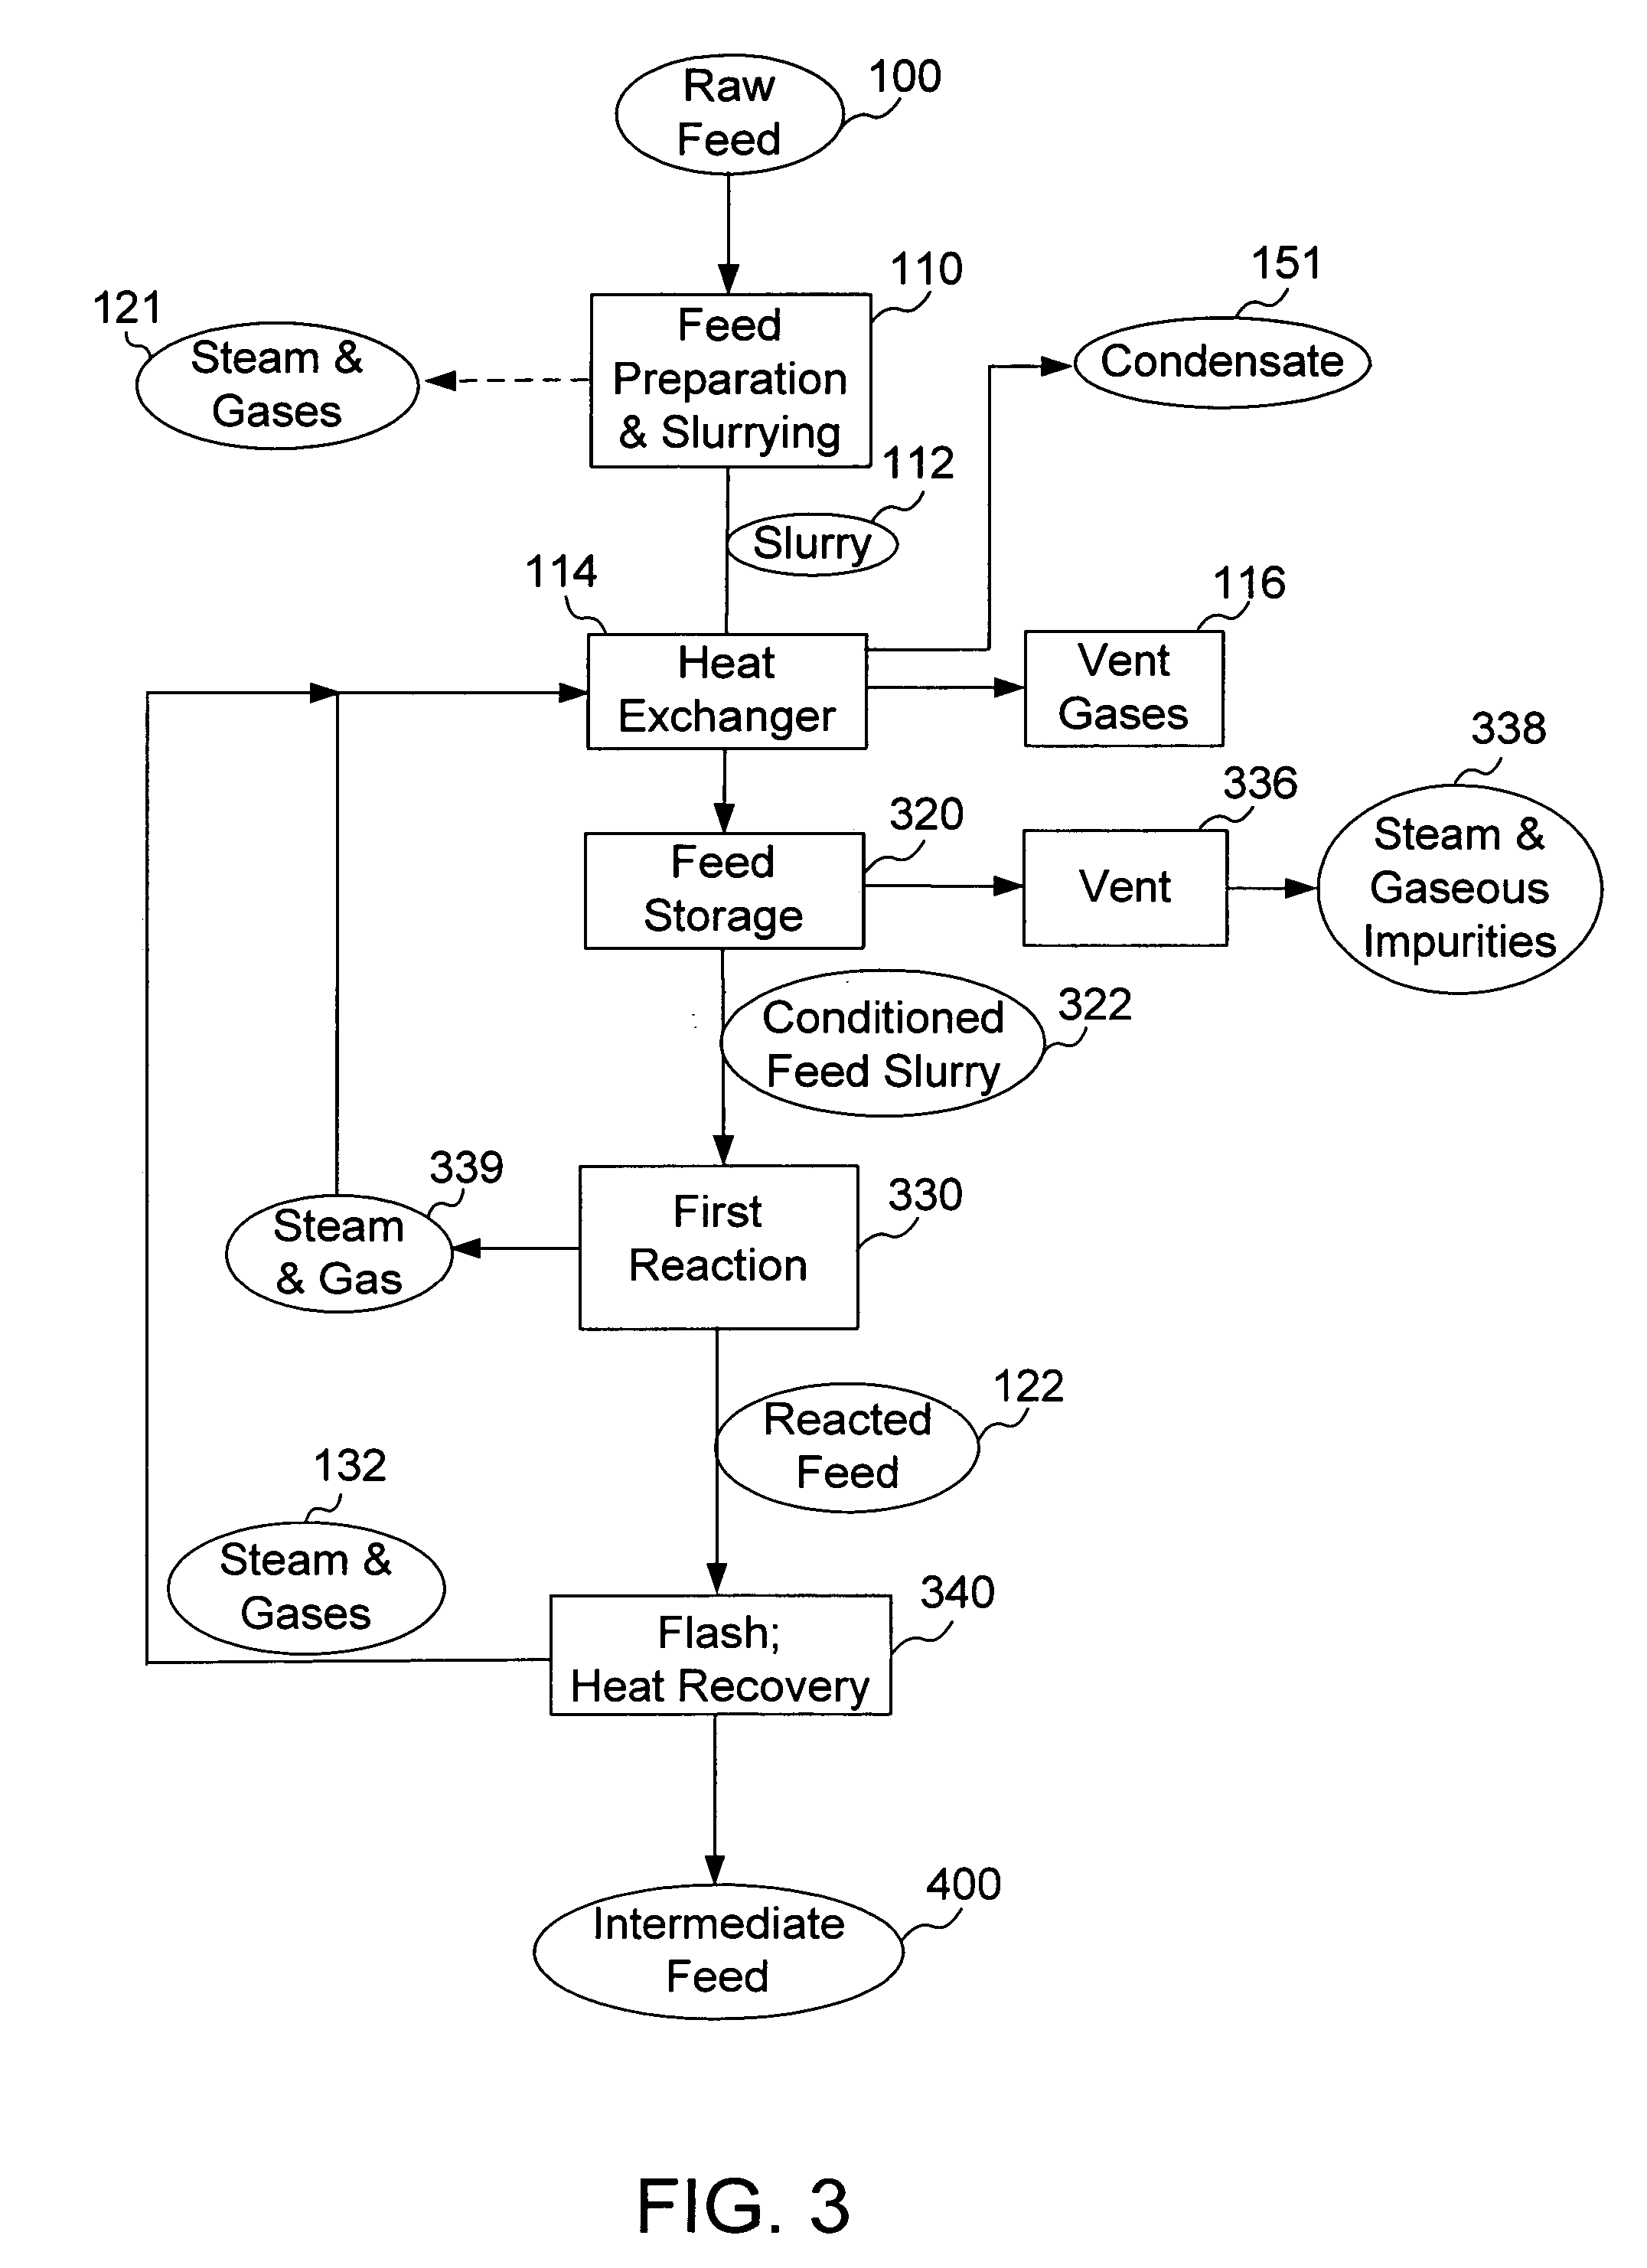 Apparatus and process for converting a mixture of organic materials into hydrocarbons and carbon solids